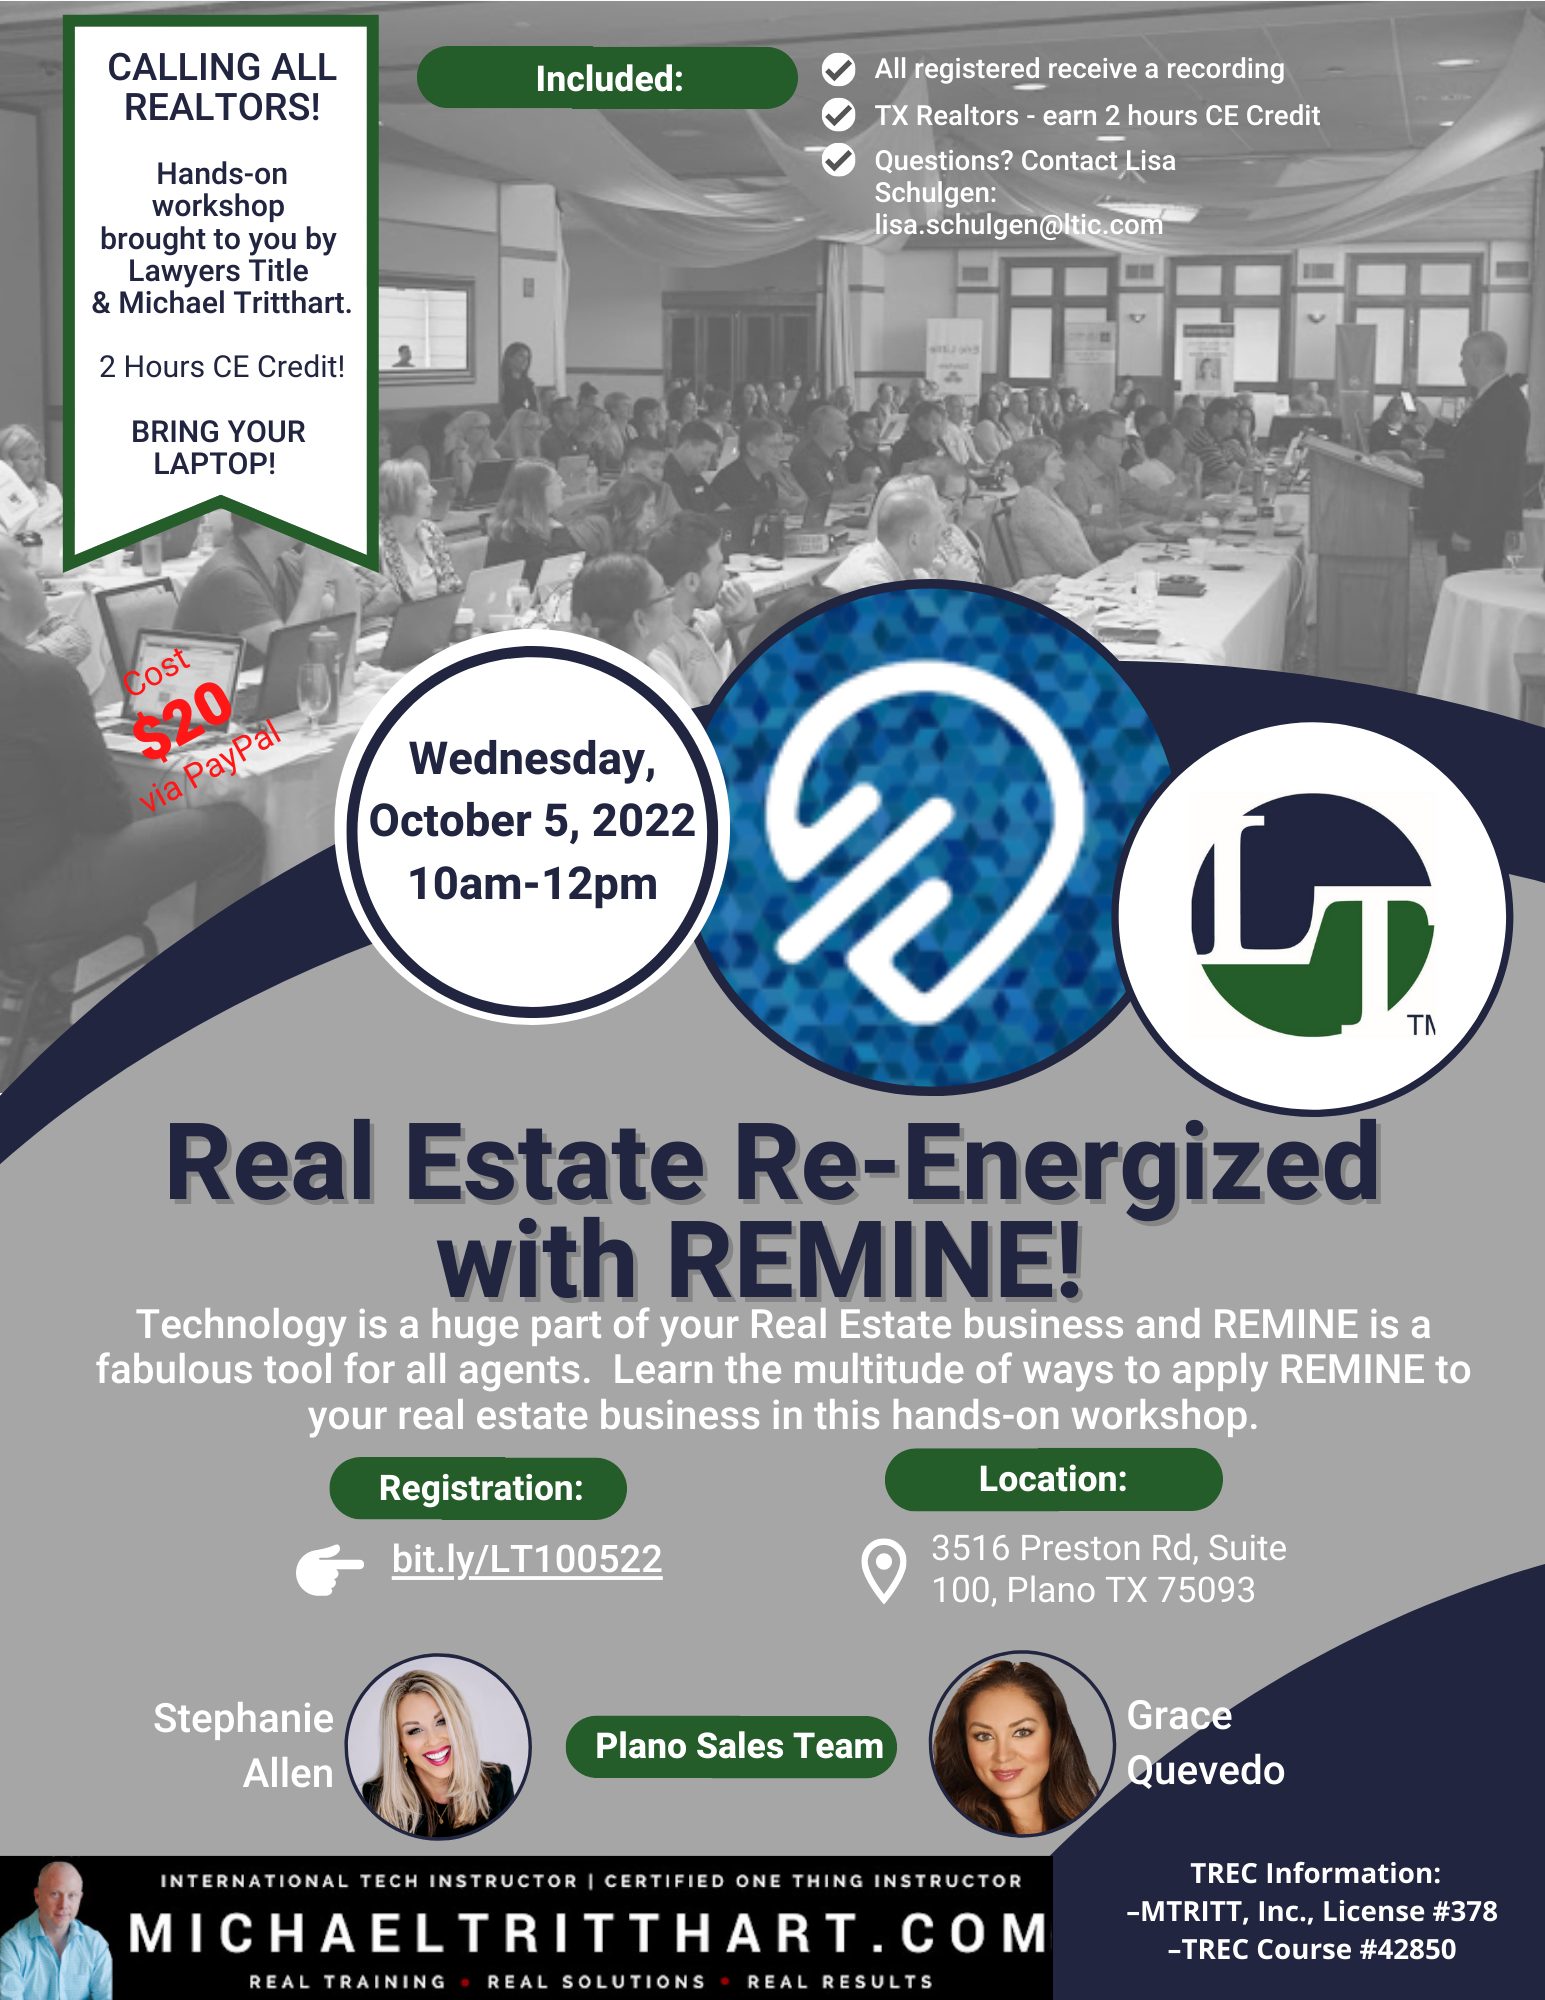 Real Estate Re-Energized with REMINE